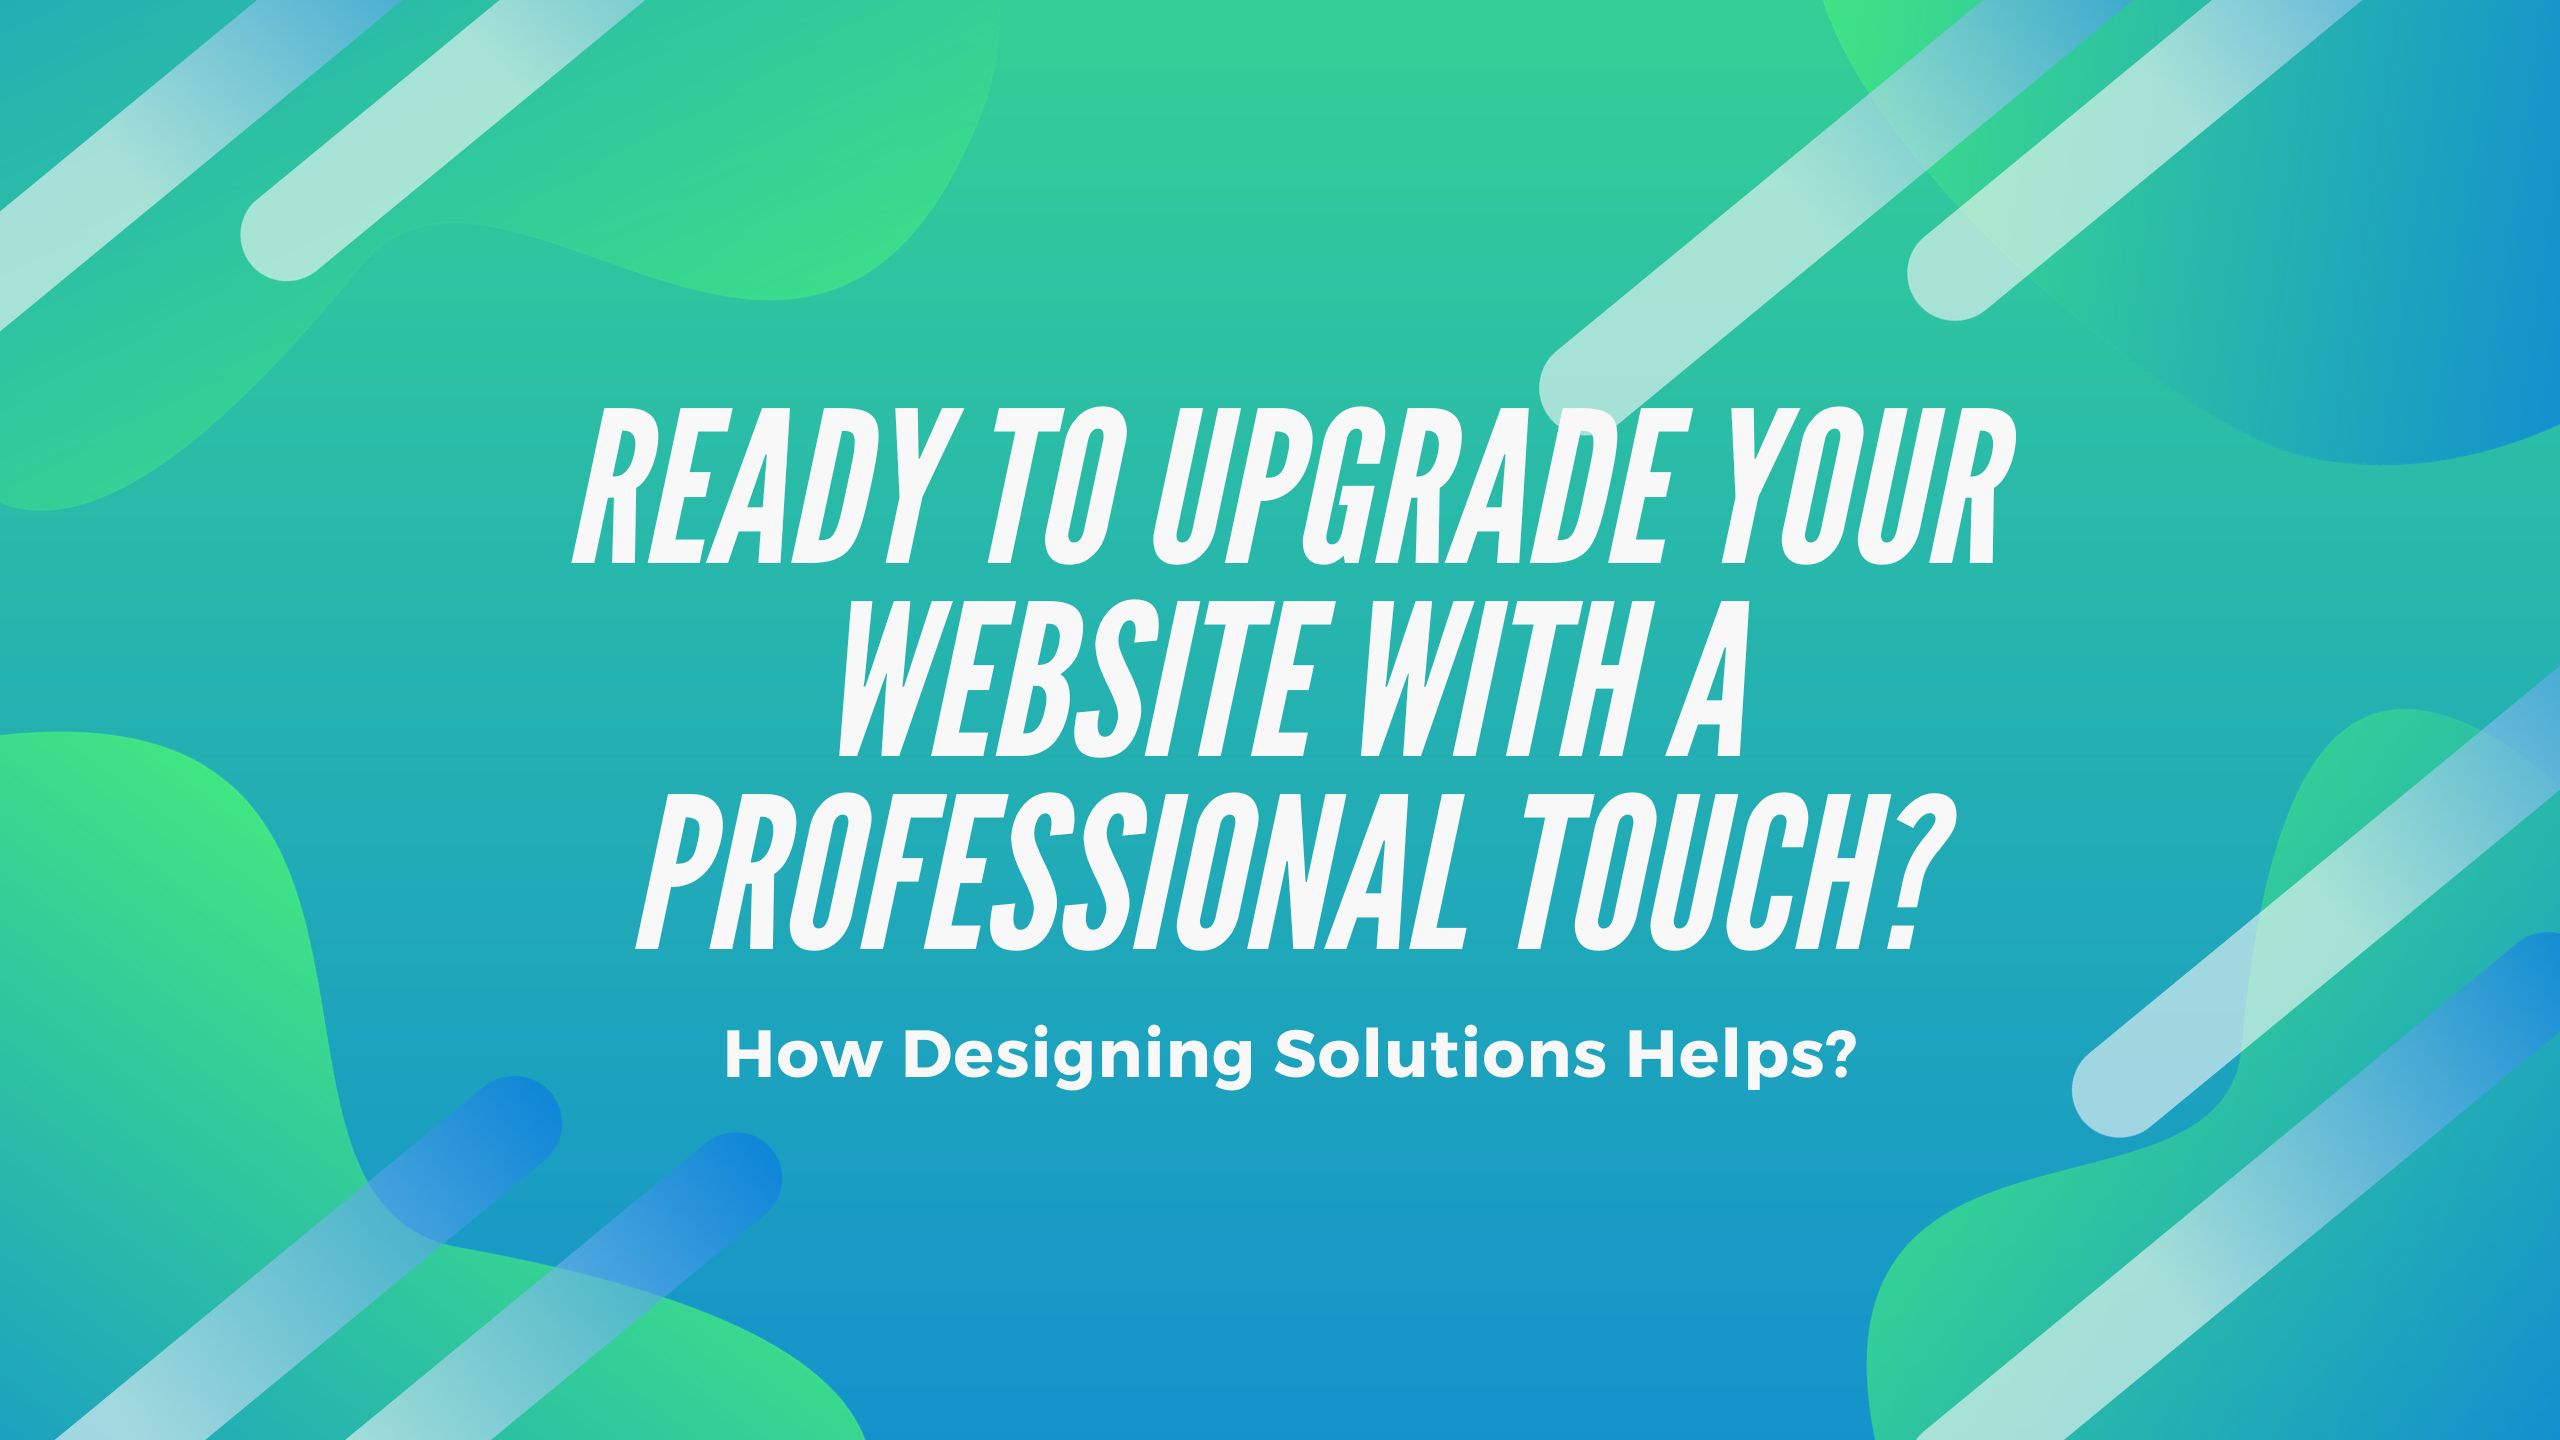 Ready to upgrade your website?